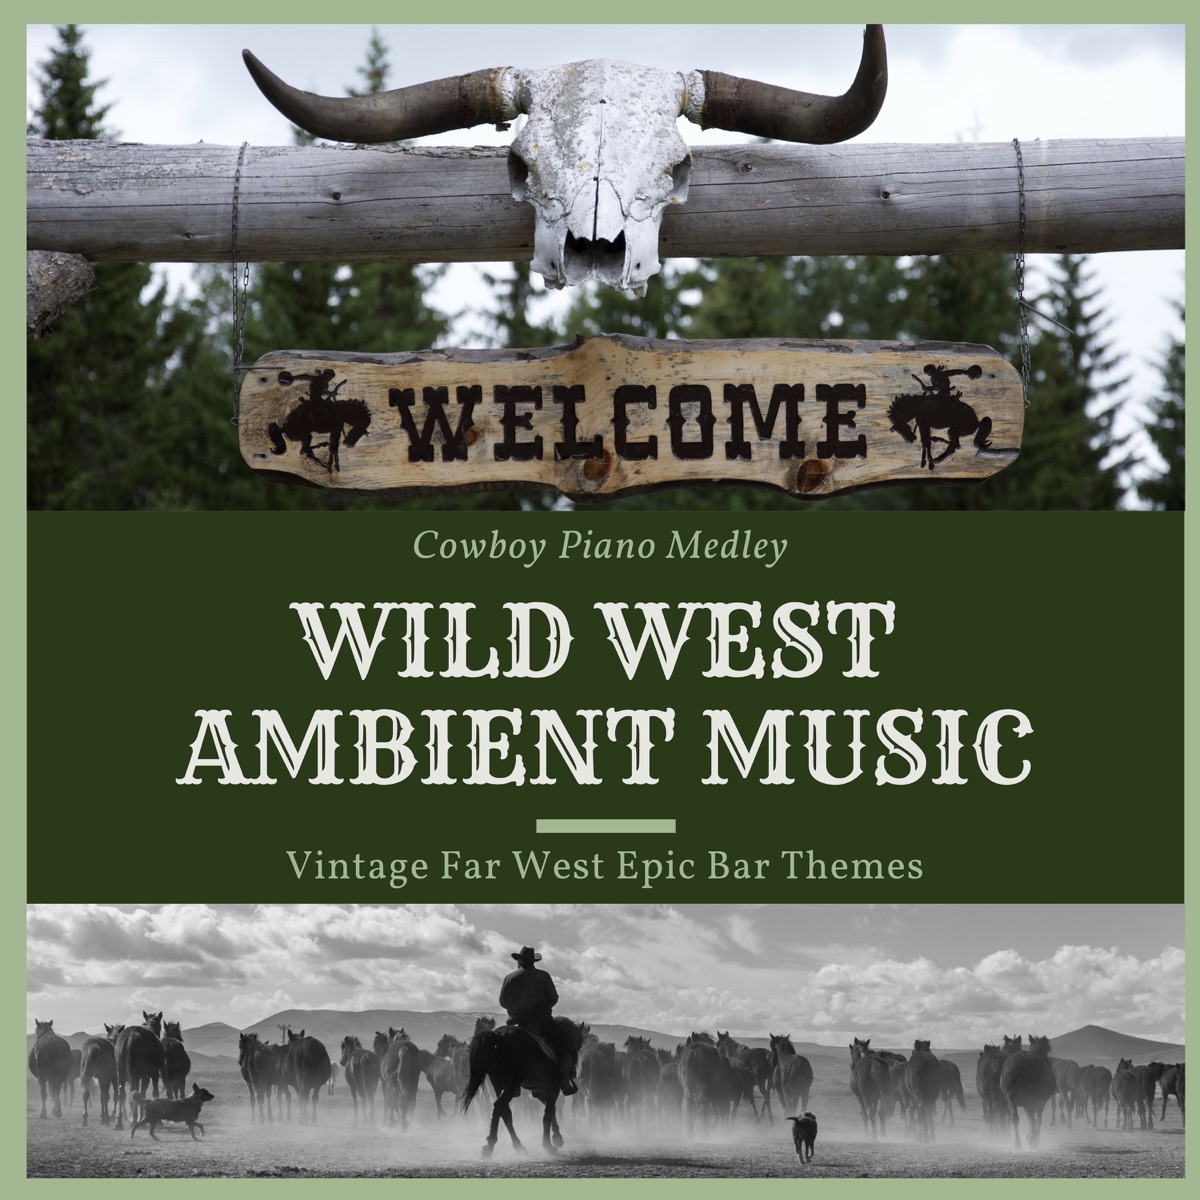 Wild West Ambient Music - Vintage Far West Epic Bar Themes, Cowboy Piano  Medley by Billy the Cowboy on Apple Music